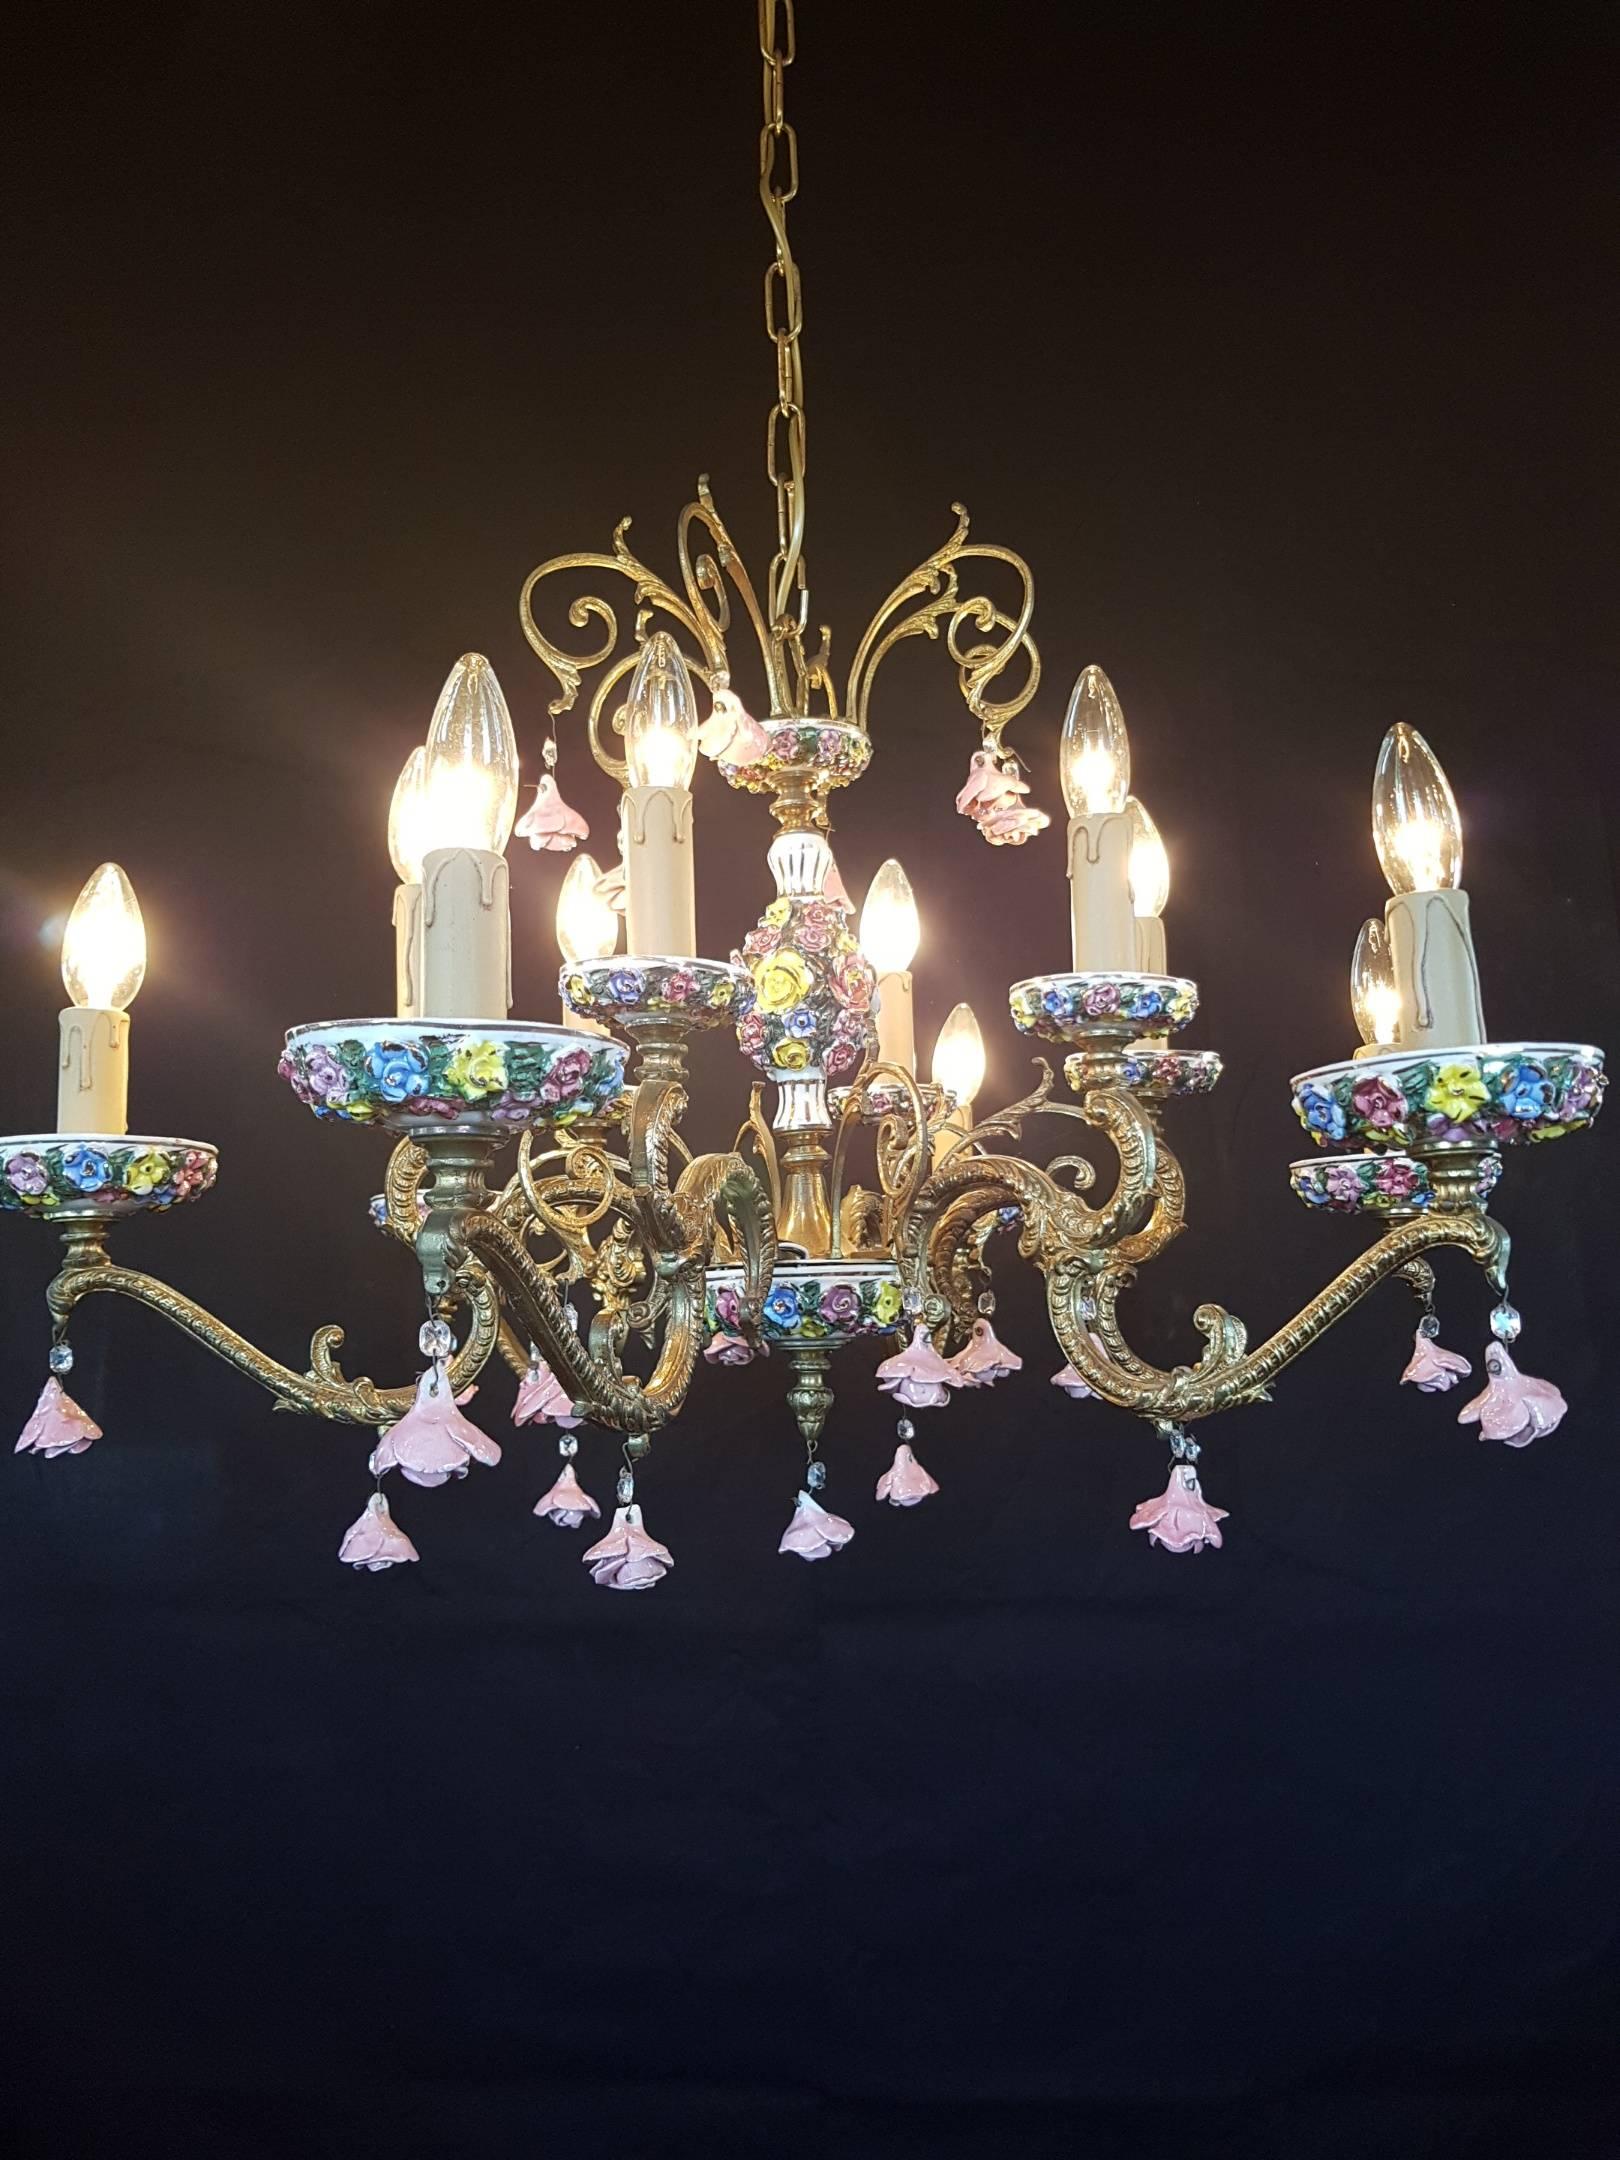 Italian Bronze and Porcelain Chandelier with Flowers, 12 Lights, 20th Century In Good Condition For Sale In Oldebroek, NL